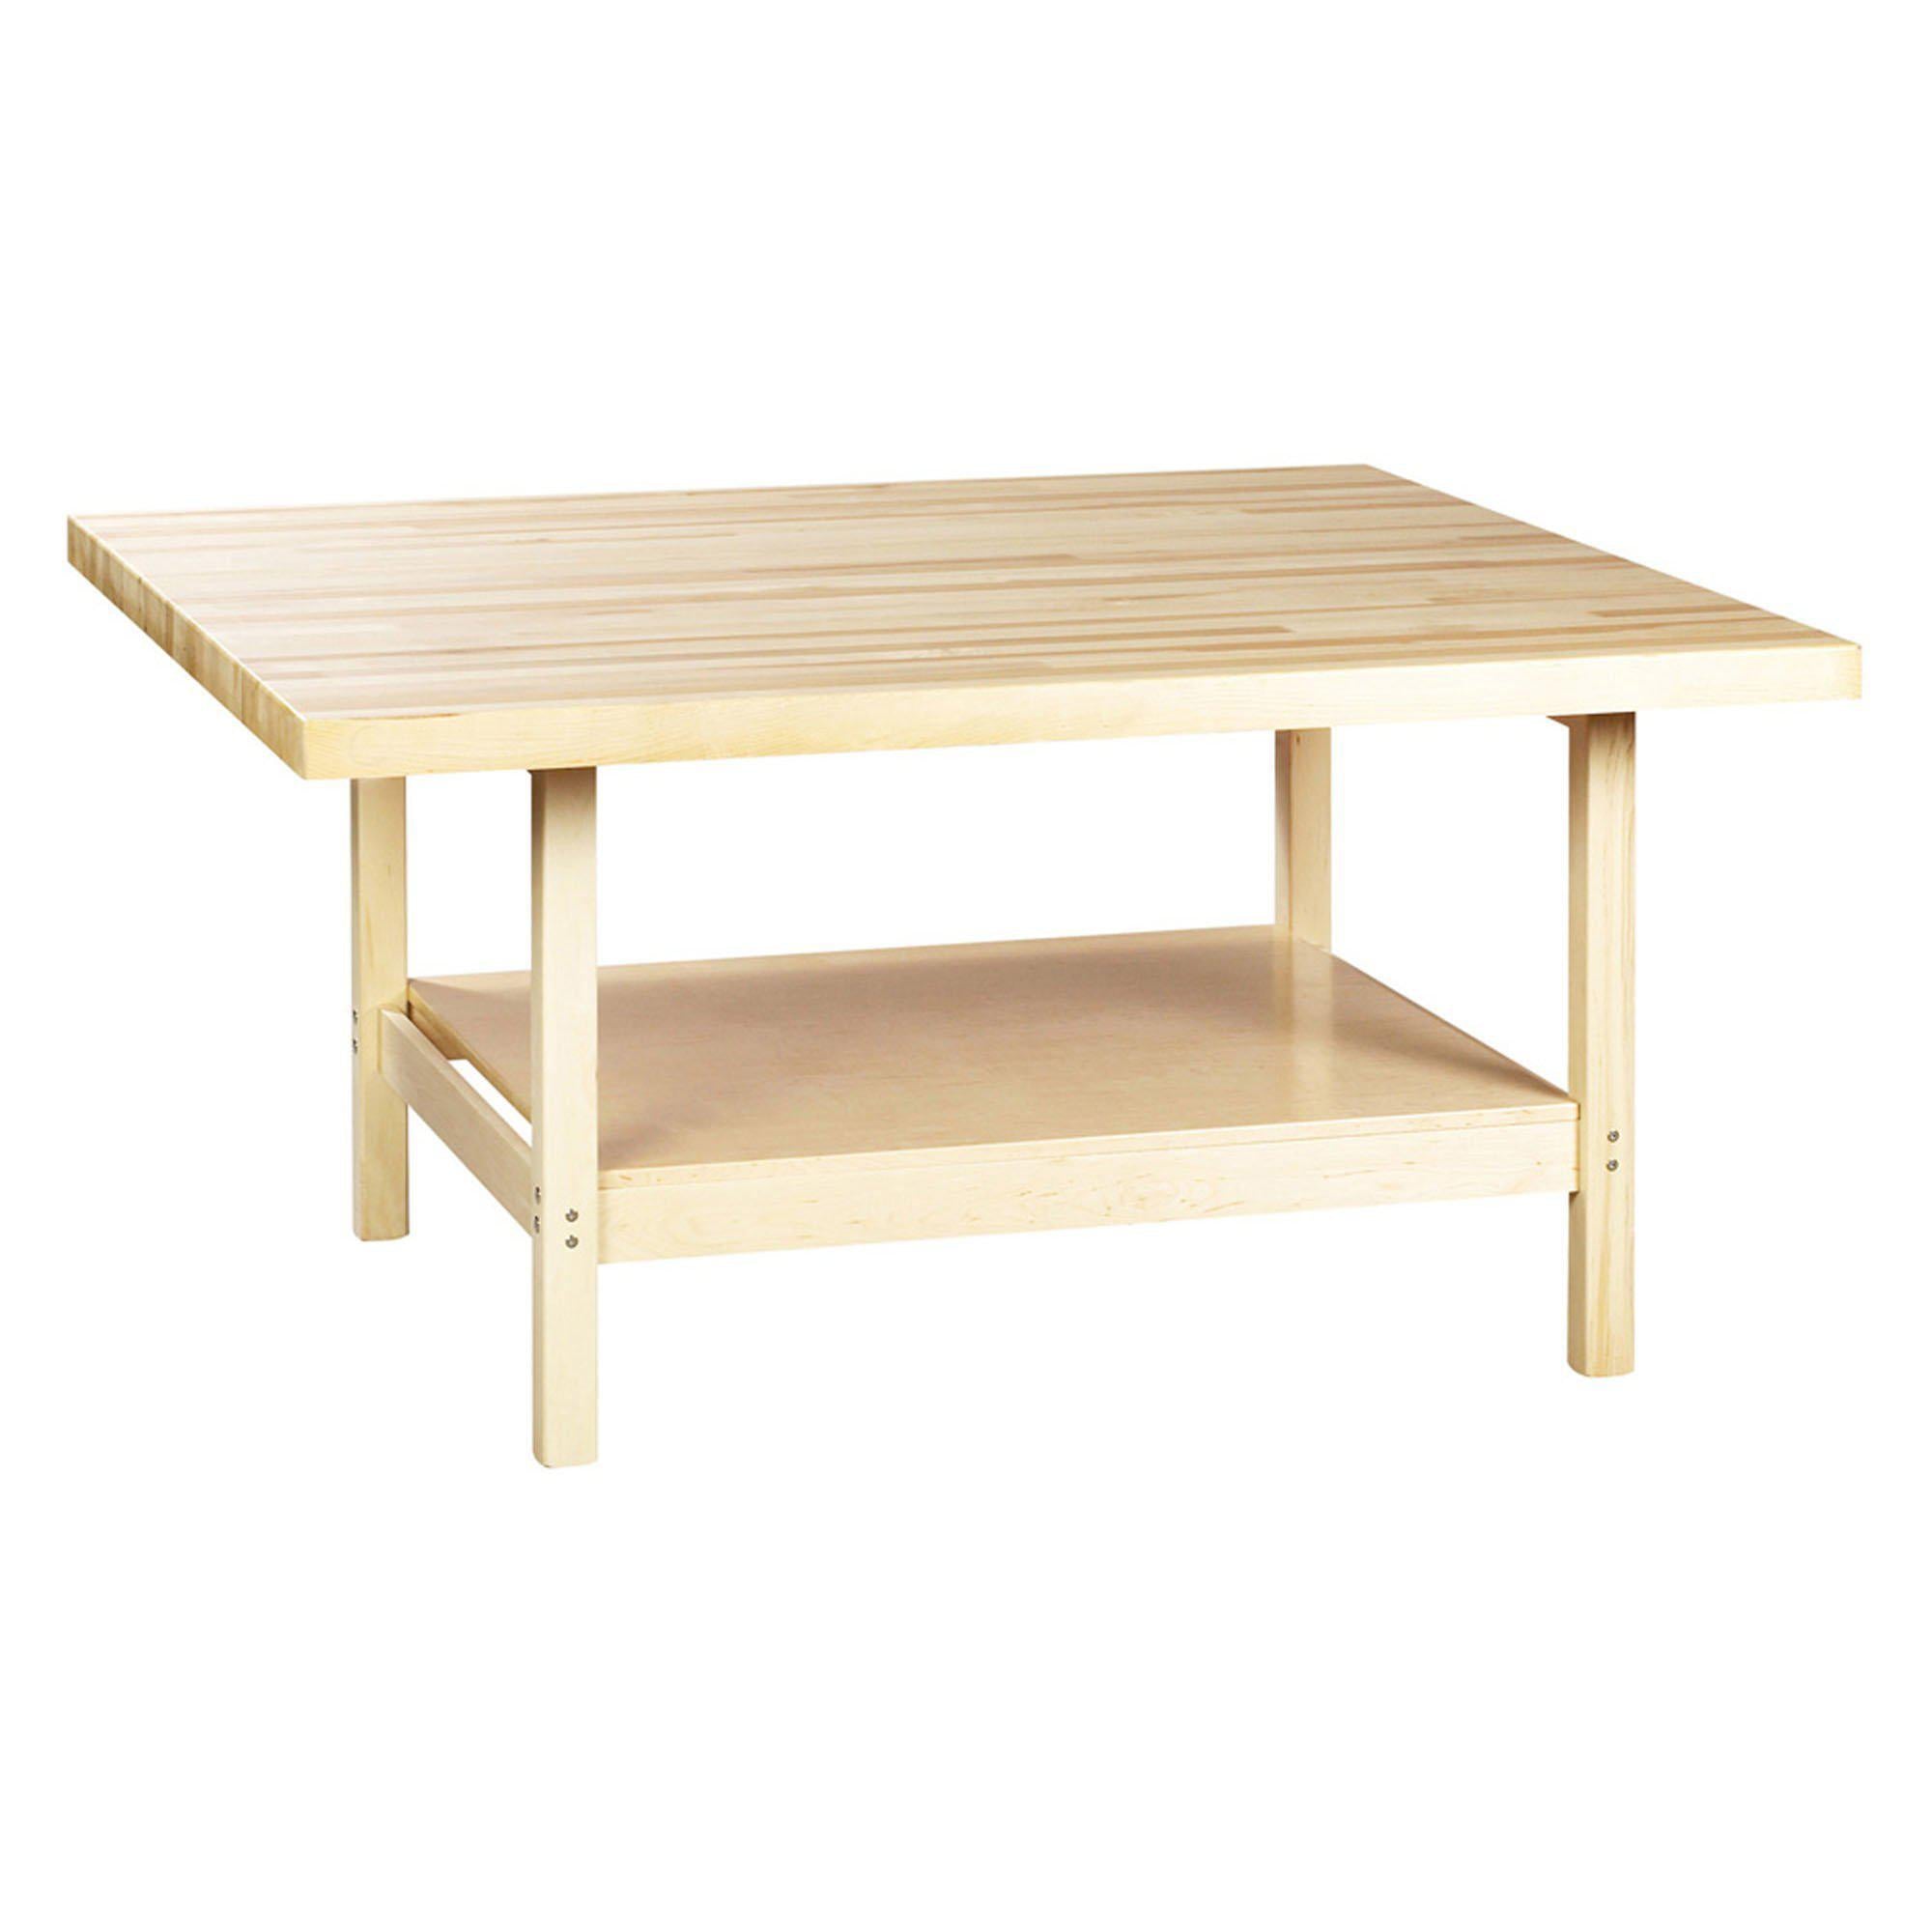 Open-Style Four-Station Wood Workbench-0-